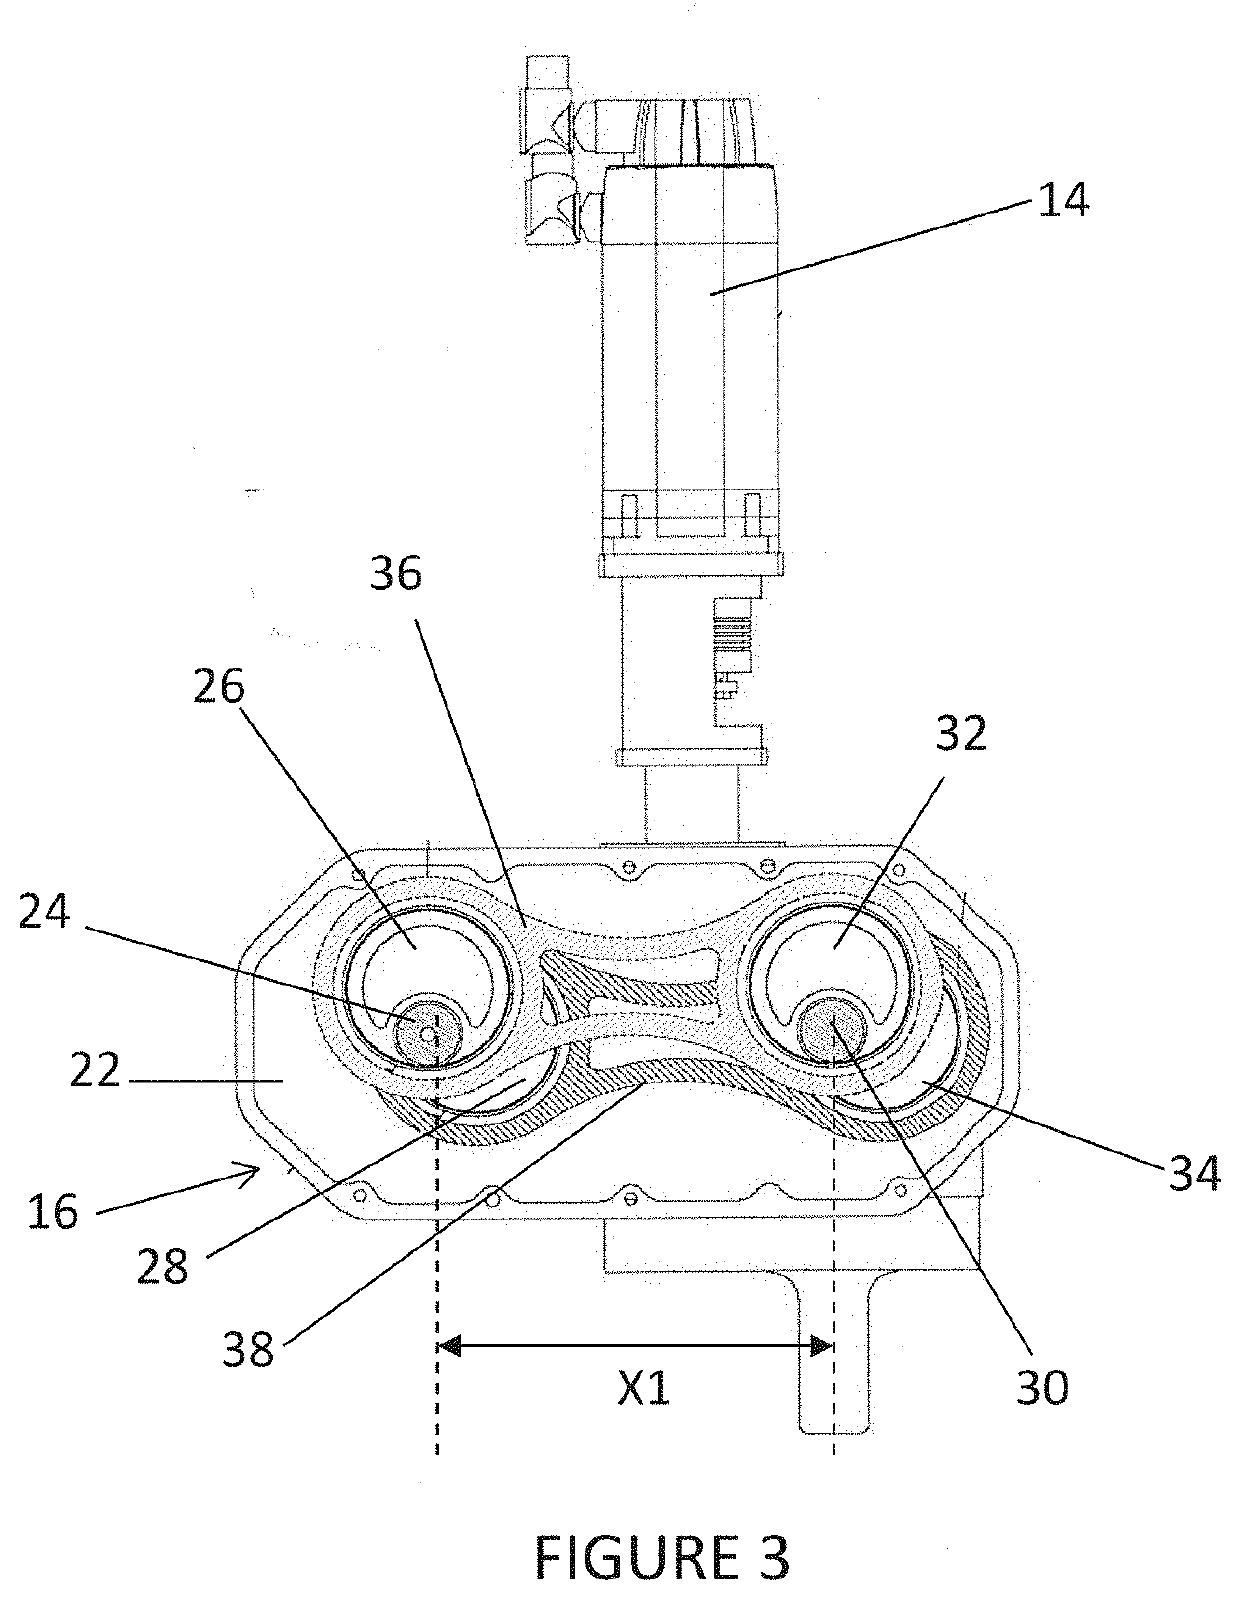 Takeout Mechanism for Machines for Forming Glass Objects